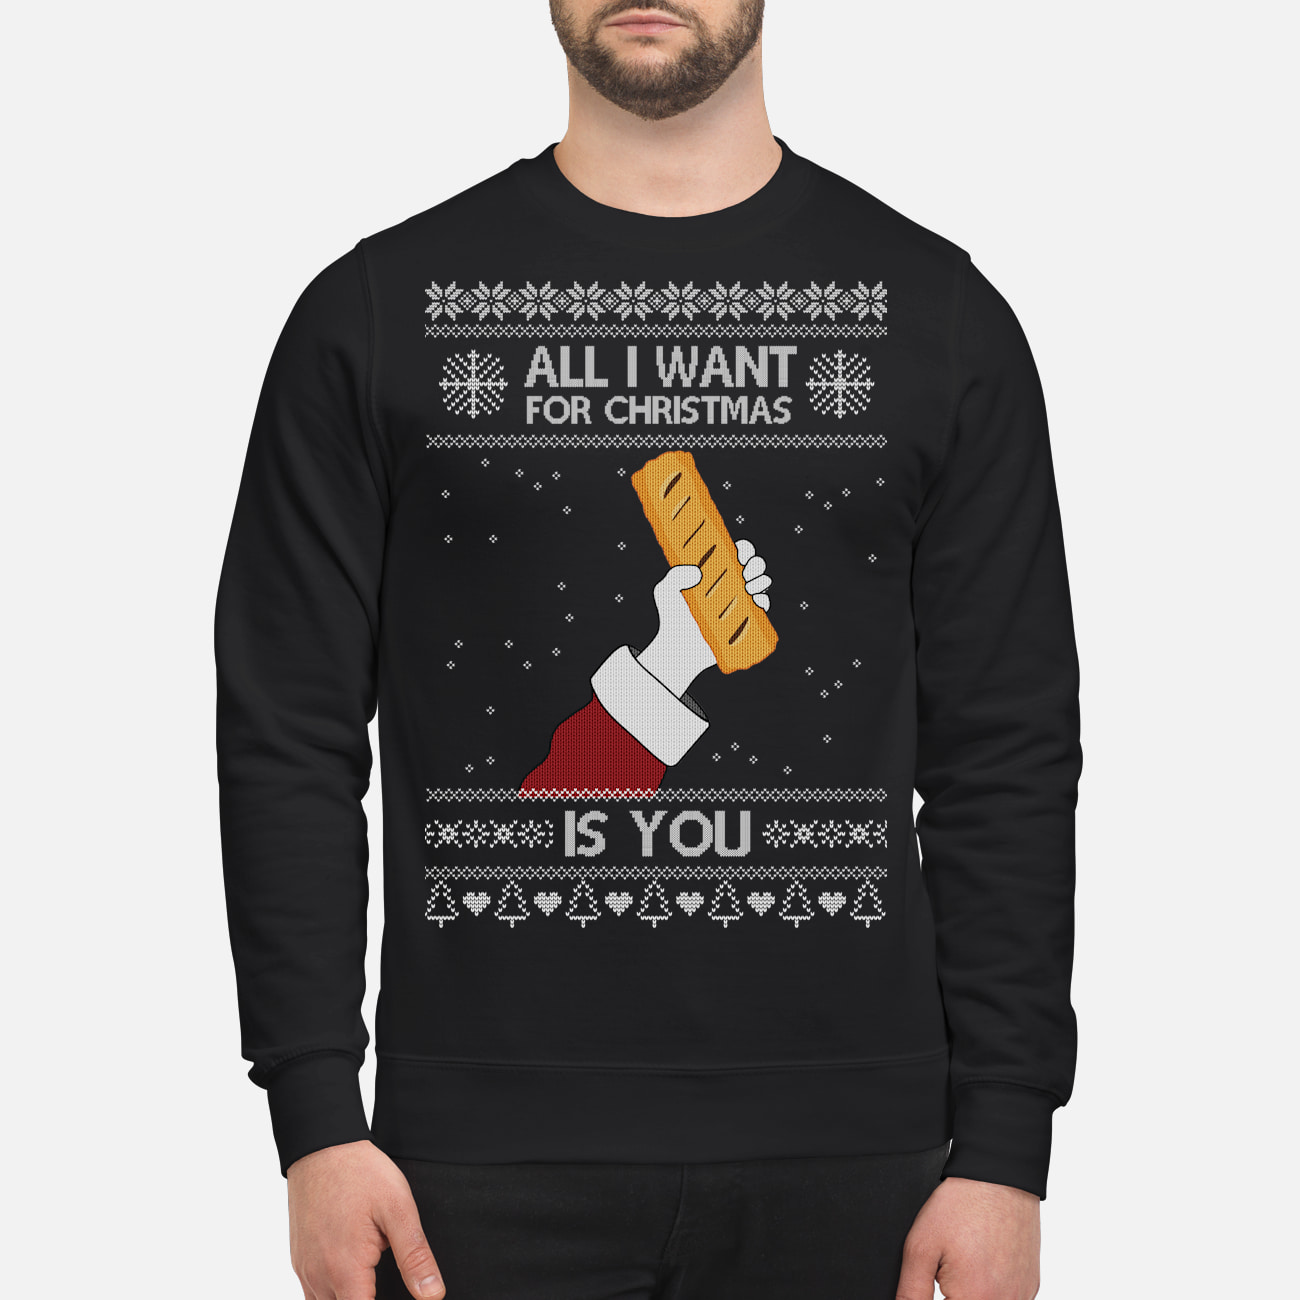 You can get 20% off Christmas jumpers, mugs, and more in The Manc Store&#8217;s Black Friday sale, The Manc